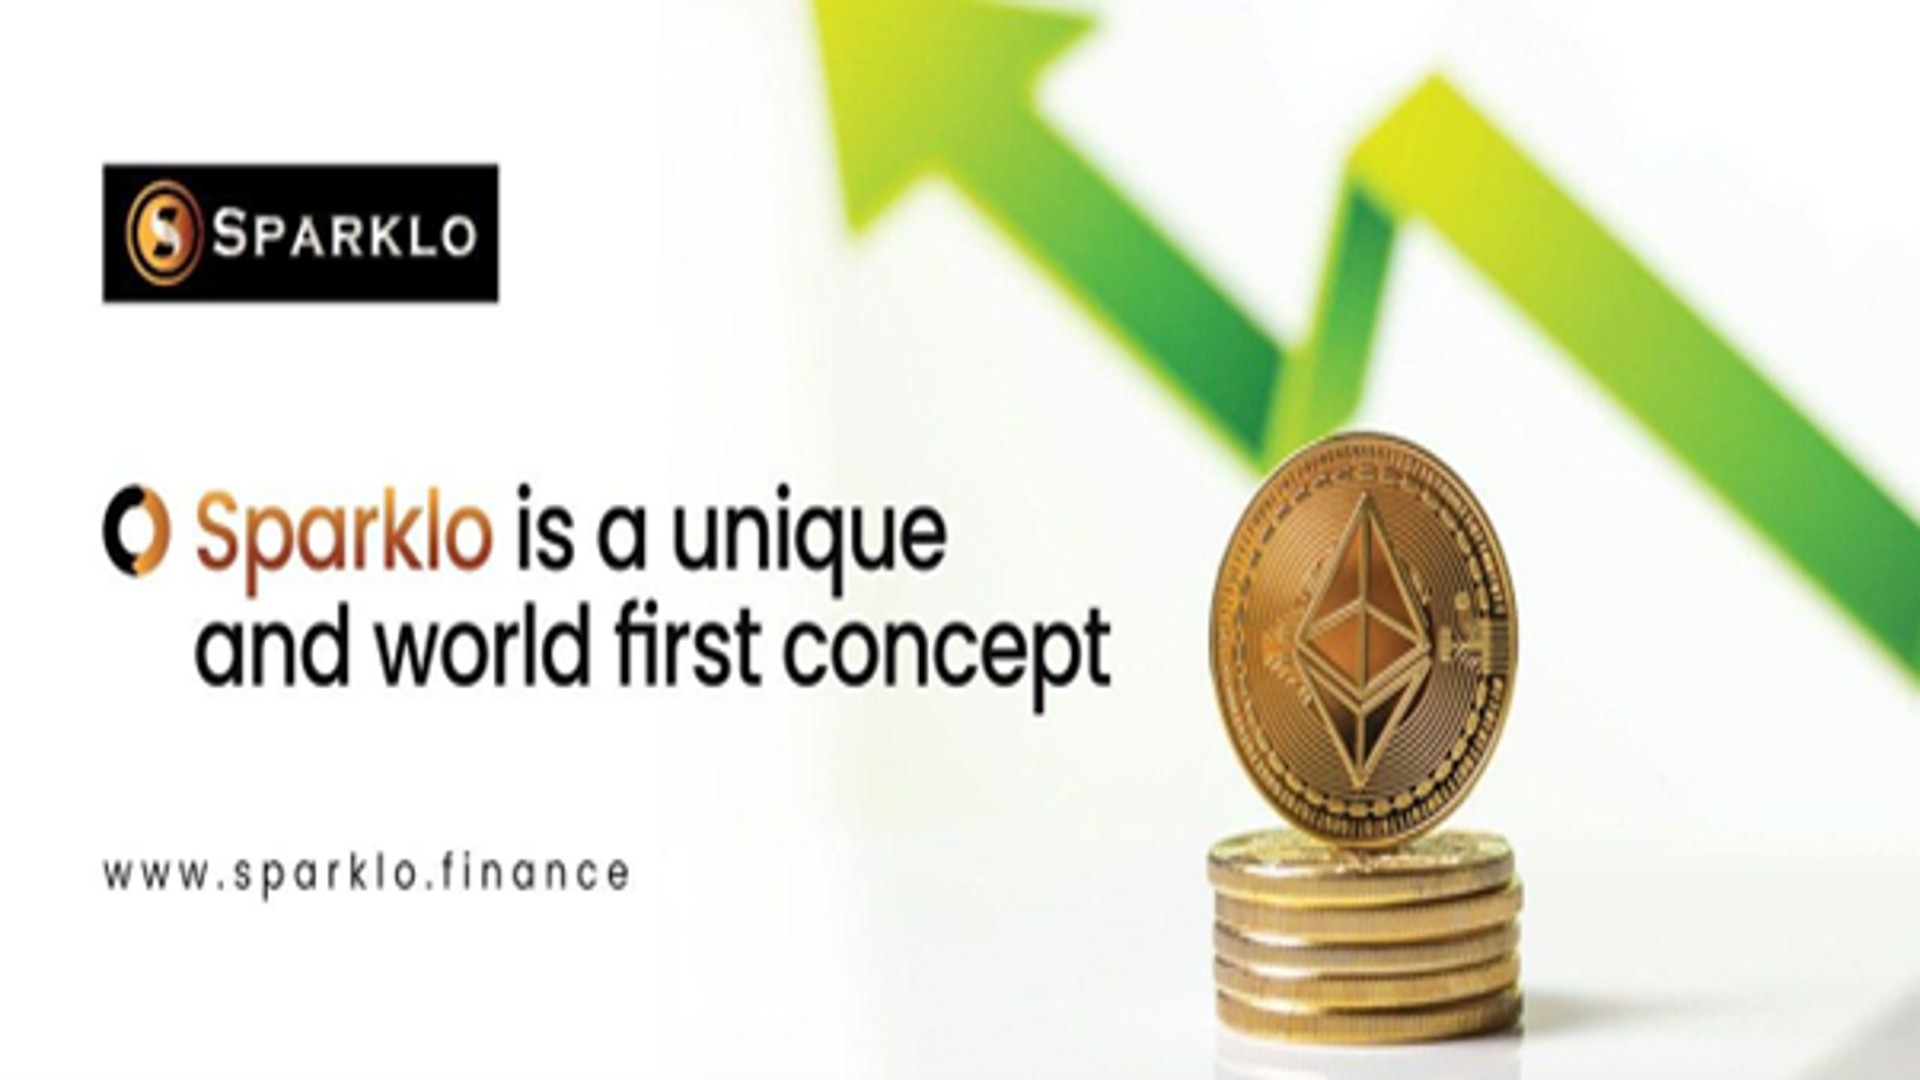 Sparklo: Investors’ Safest Bet Ahead of Lido DAO and NEAR Protocol